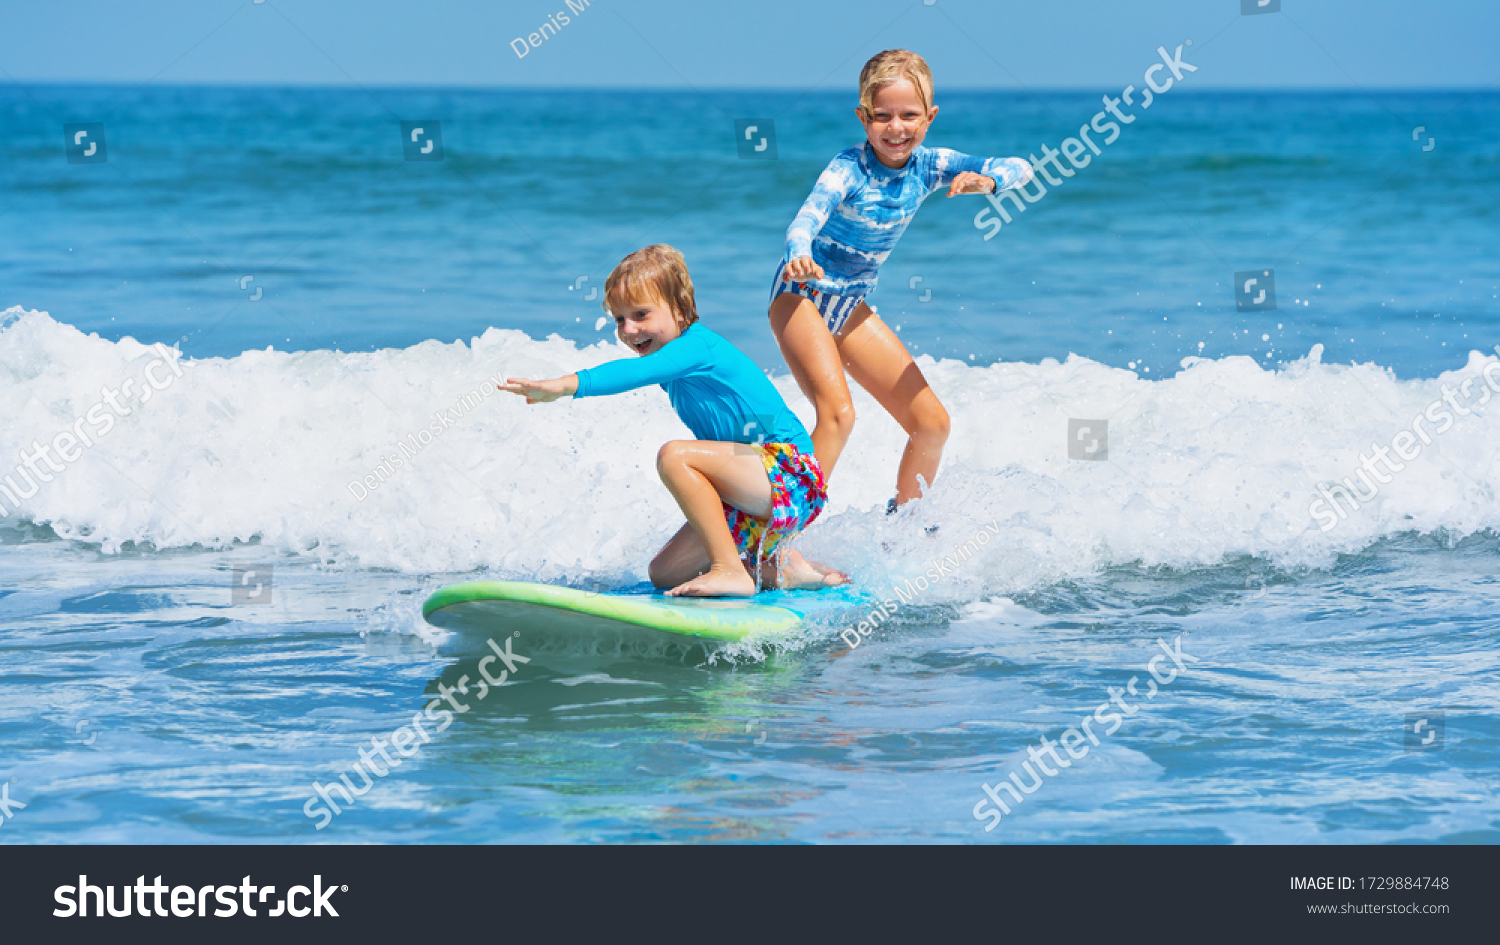 Happy baby boy and girl - young surfers ride with fun on one surfboard. Active family lifestyle, kids outdoor water sport lessons, swimming activity in surf camp. Sea beach summer holiday with child. #1729884748